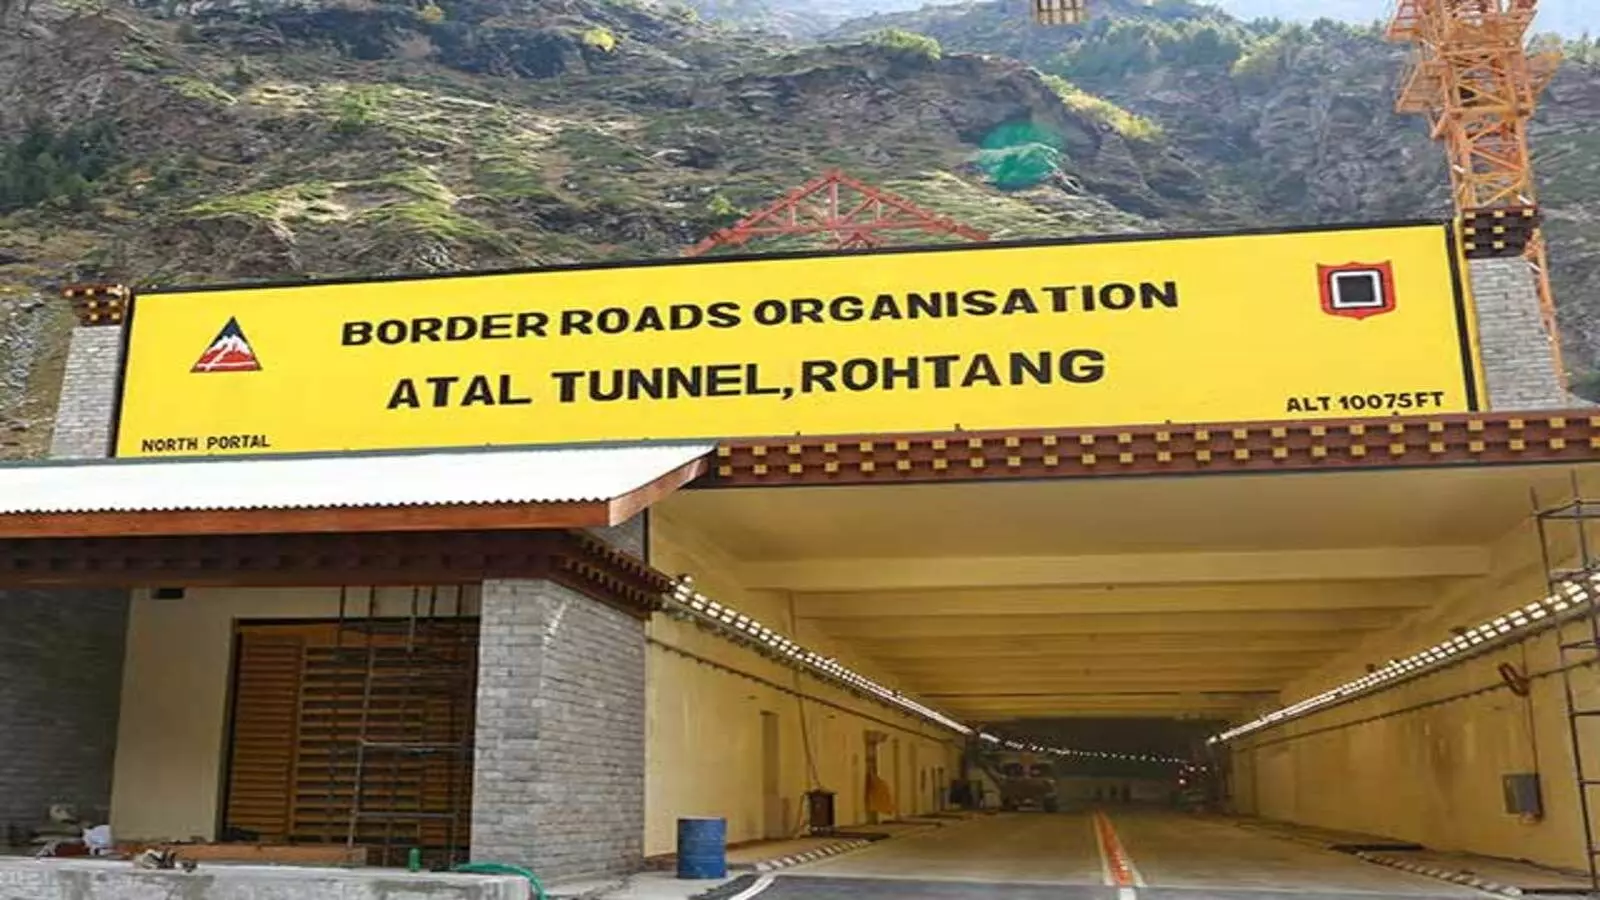 Prime Minister dedicates Atal Tunnel beneath Rohtang Pass to the nation